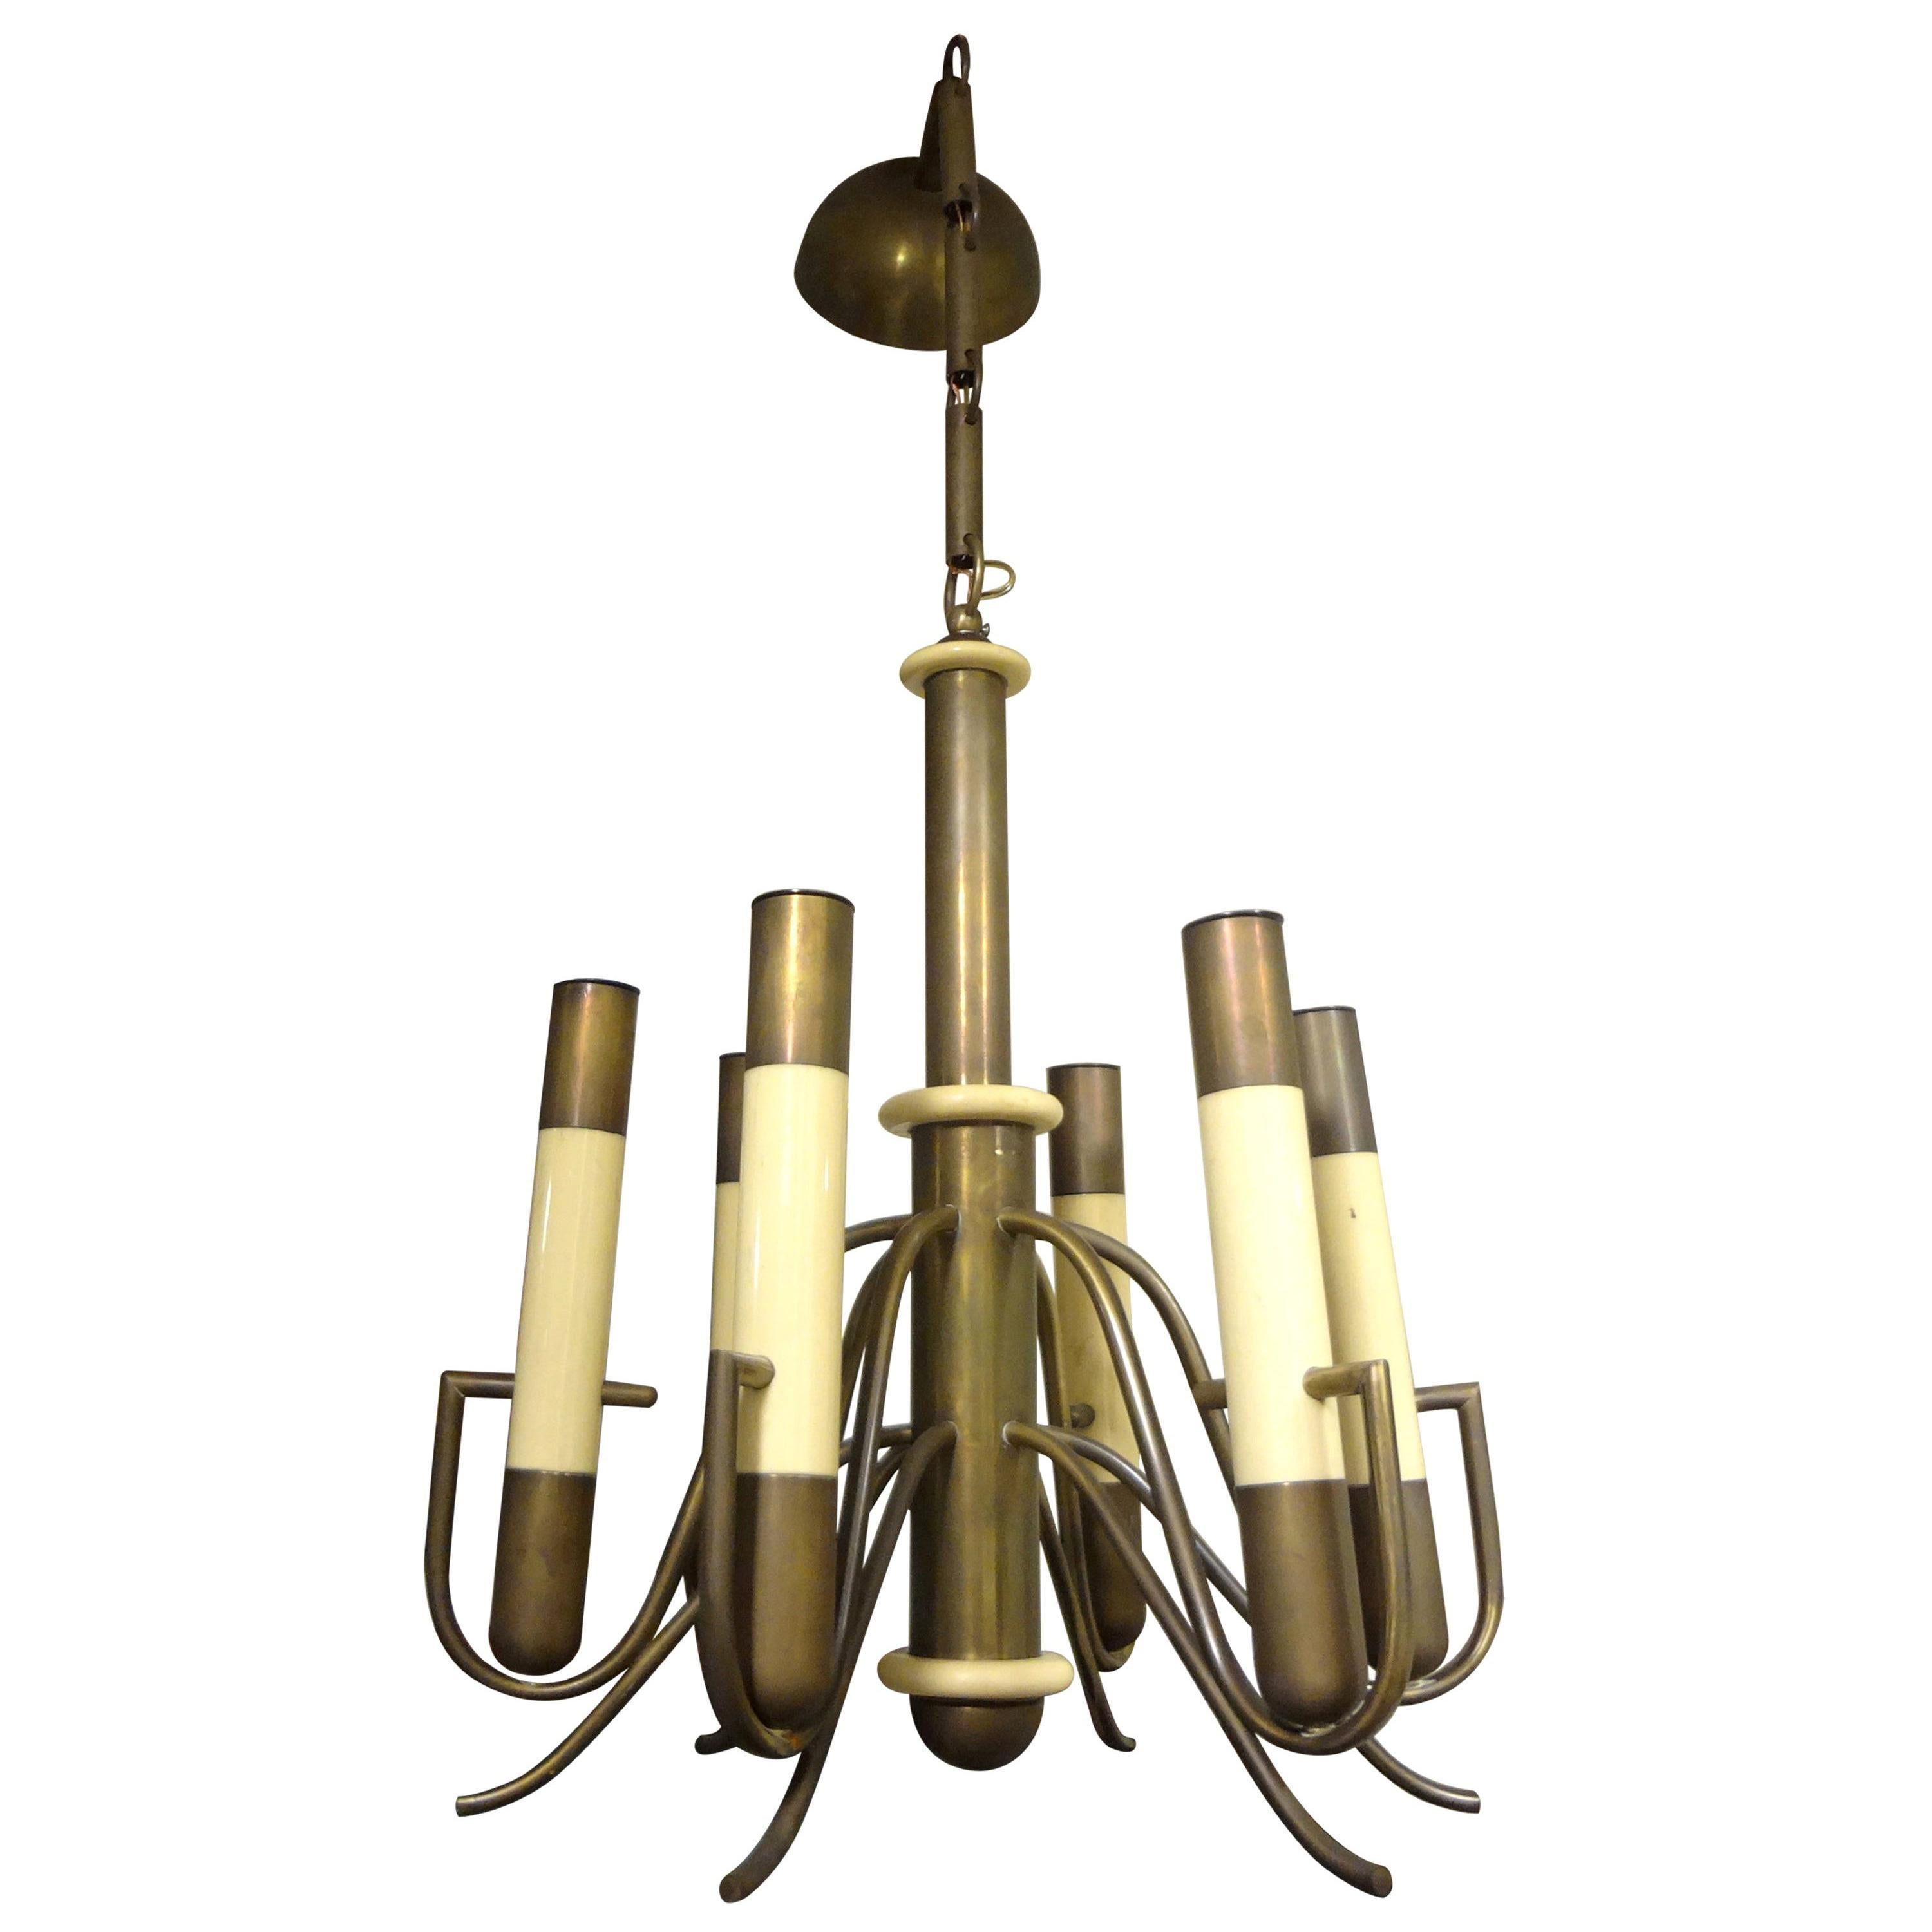 Italian Brutalist Brass and Bakelite Chandelier by Nucleo Forme For Sale